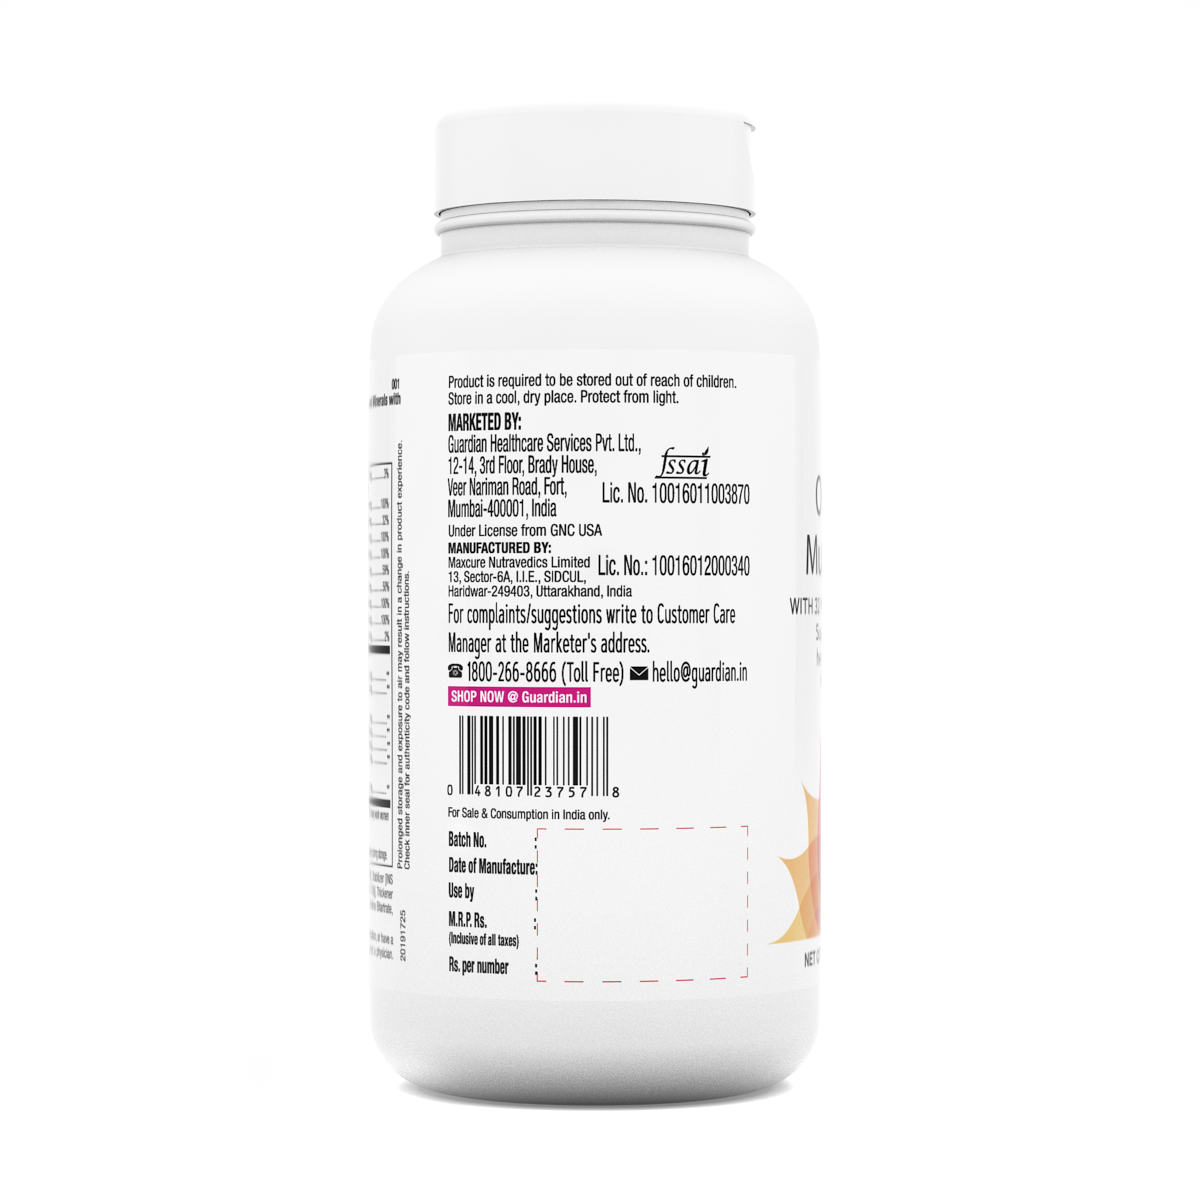 GNC Womens One Daily Multivitamin - Improves Energy, Immunity, Skin and Overall Health